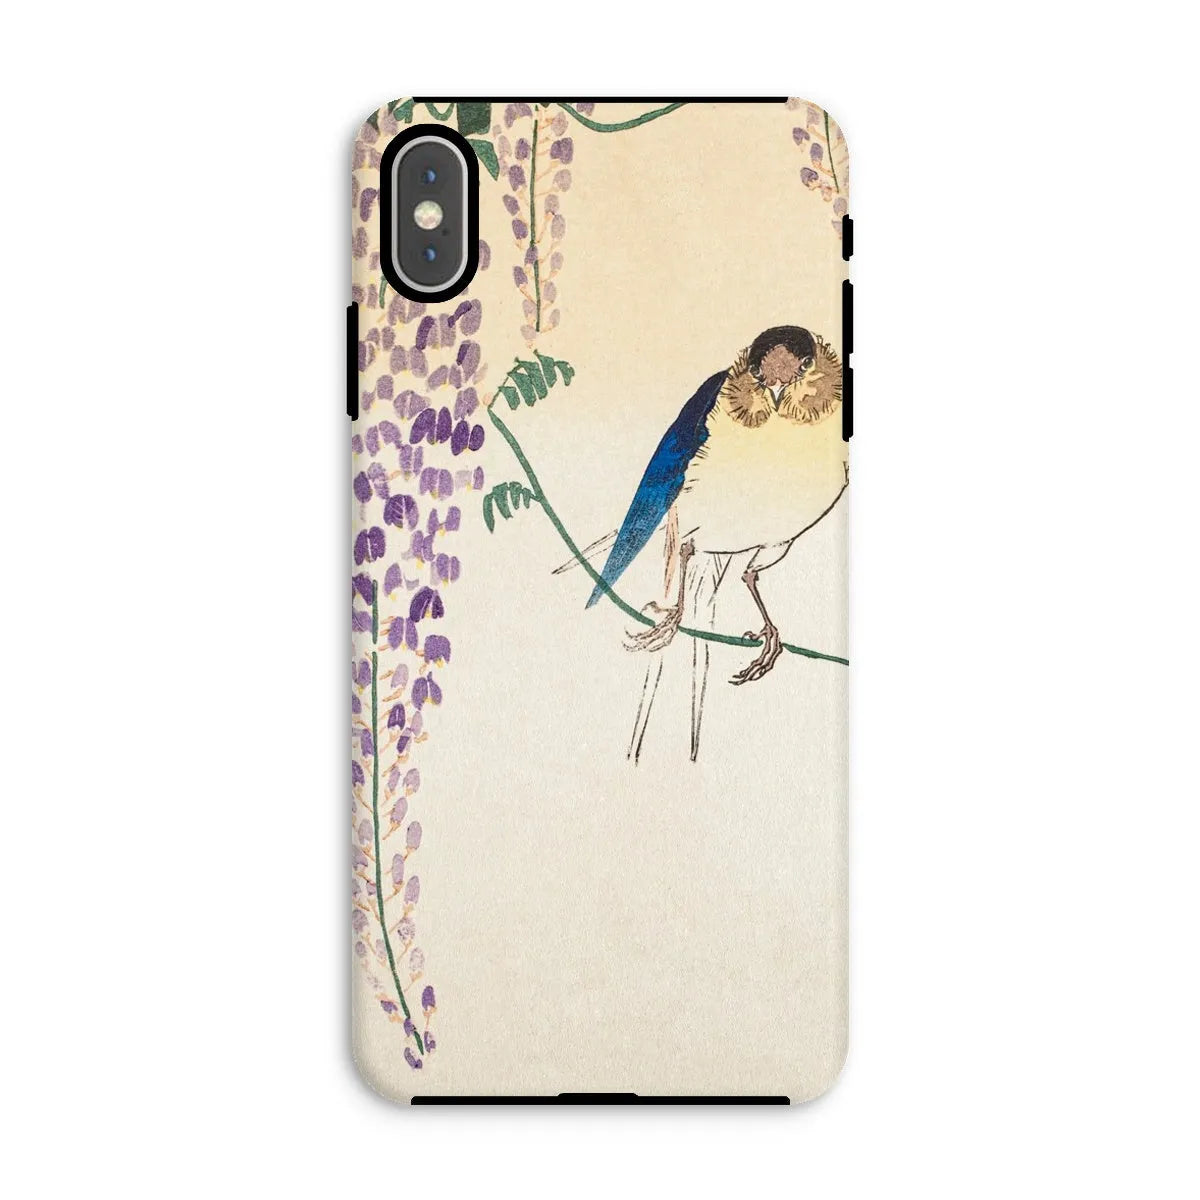 Wisteria And Swallow - Japanese Art Phone Case - Ohara Koson - Iphone Xs Max / Matte - Mobile Phone Cases - Aesthetic